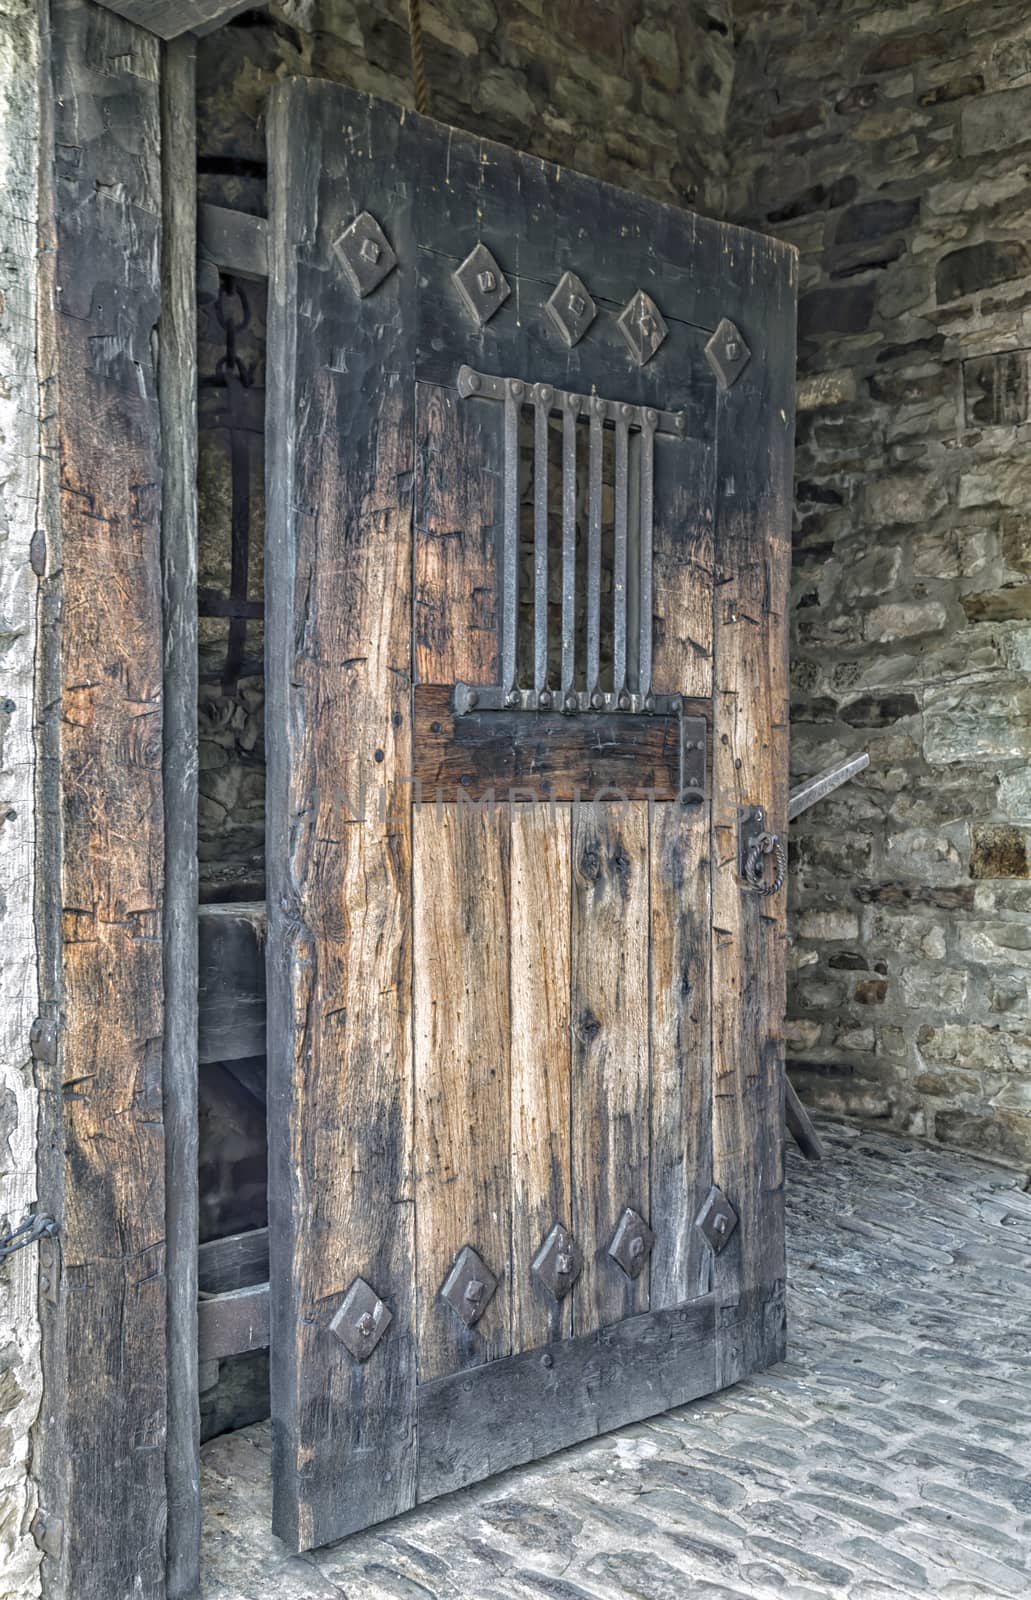 Wooden Door with Iron Bars by fallesenphotography